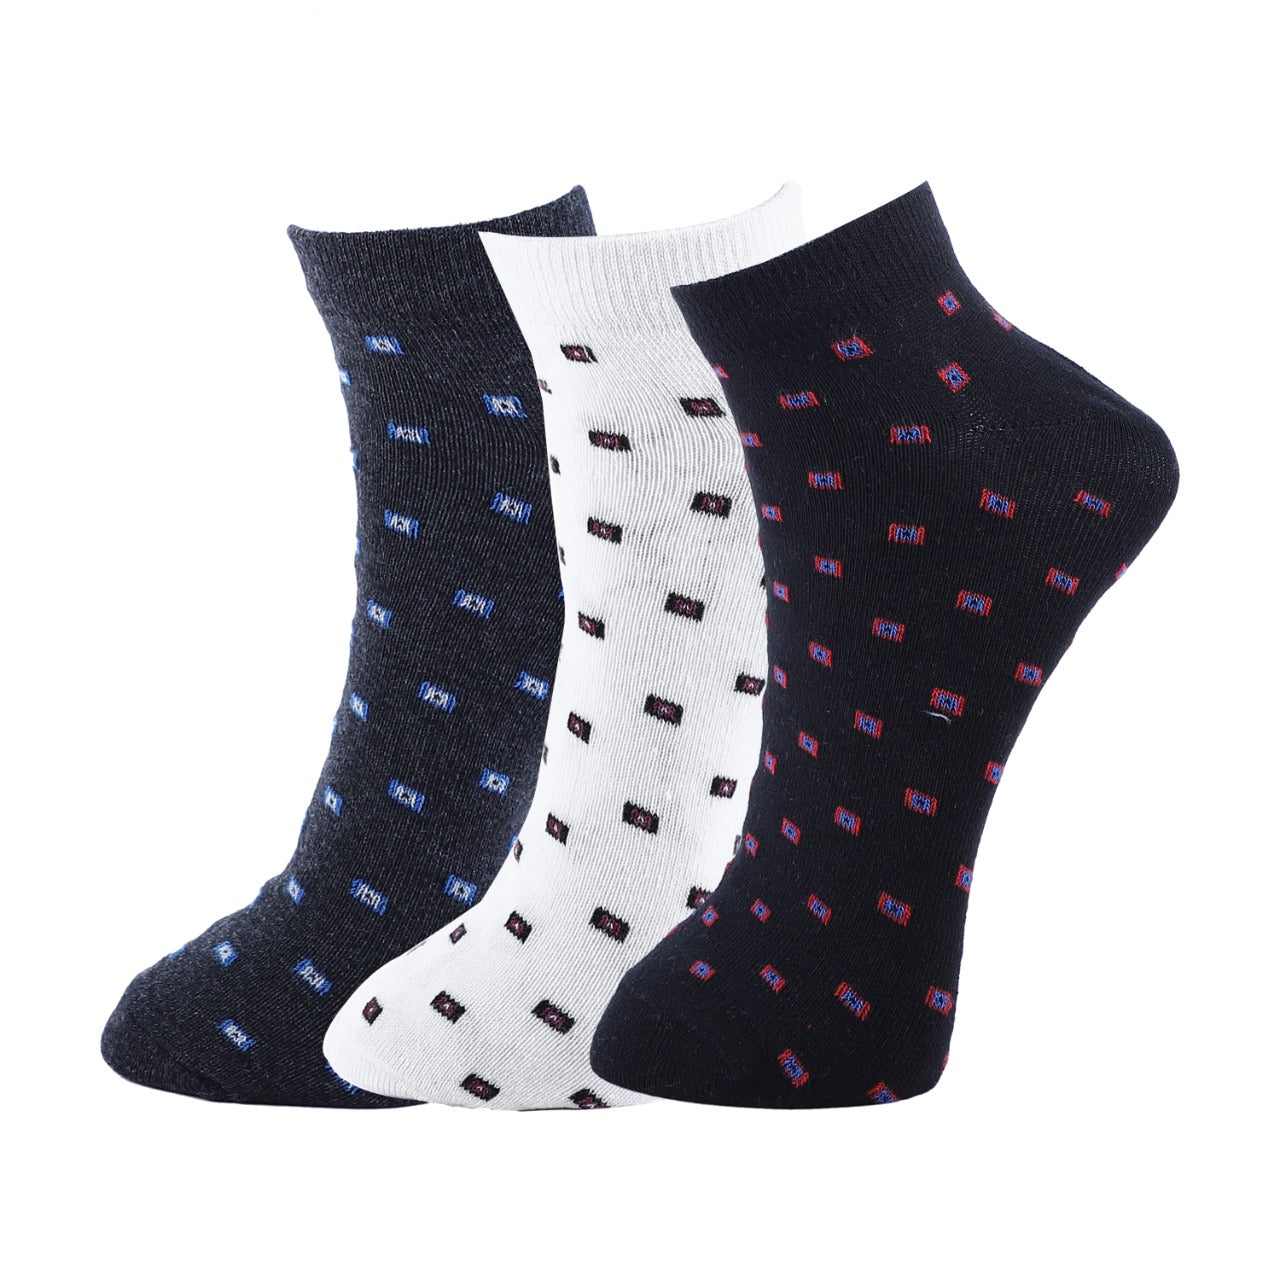 Williwr Men's Non Terry Ankle Length Socks In Self Design, Available In Pack of 3 pairs